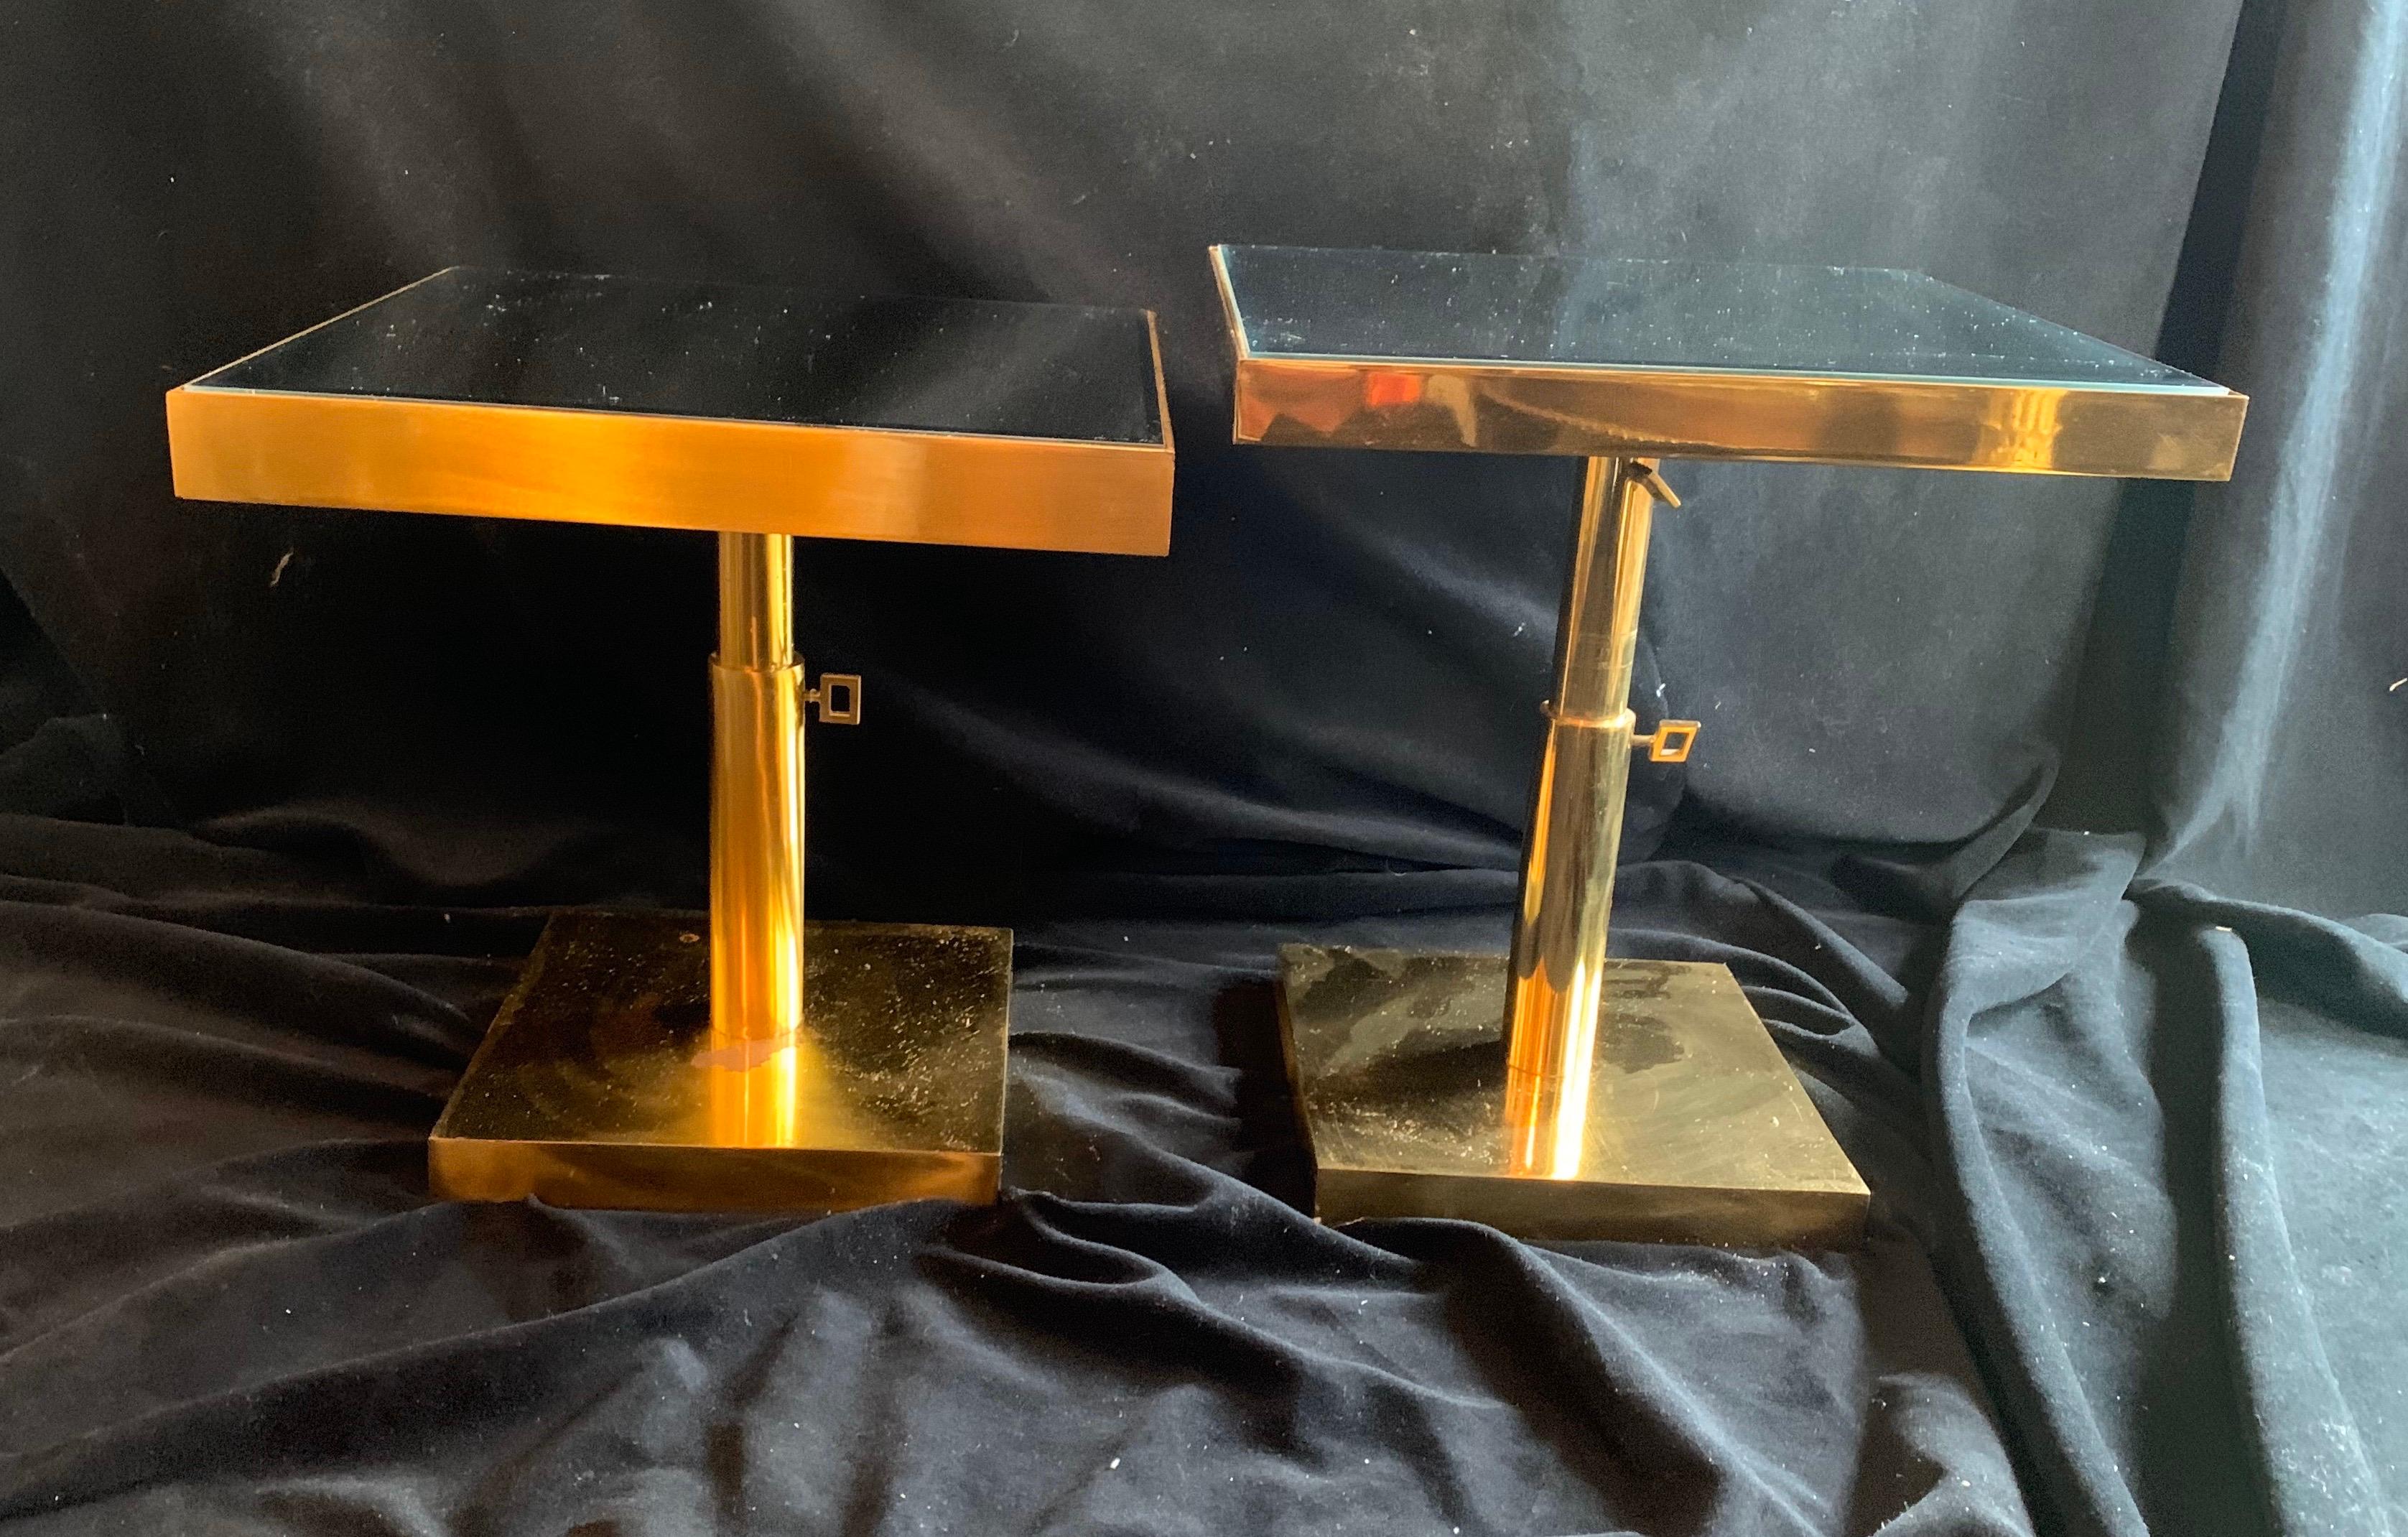 A wonderful pair of Mid-Century Modern bronze and beveled mirror, telescoping square side tables height is adjustable by 2 knobs.
Purchased from Lorin Marsh showroom in New York City.